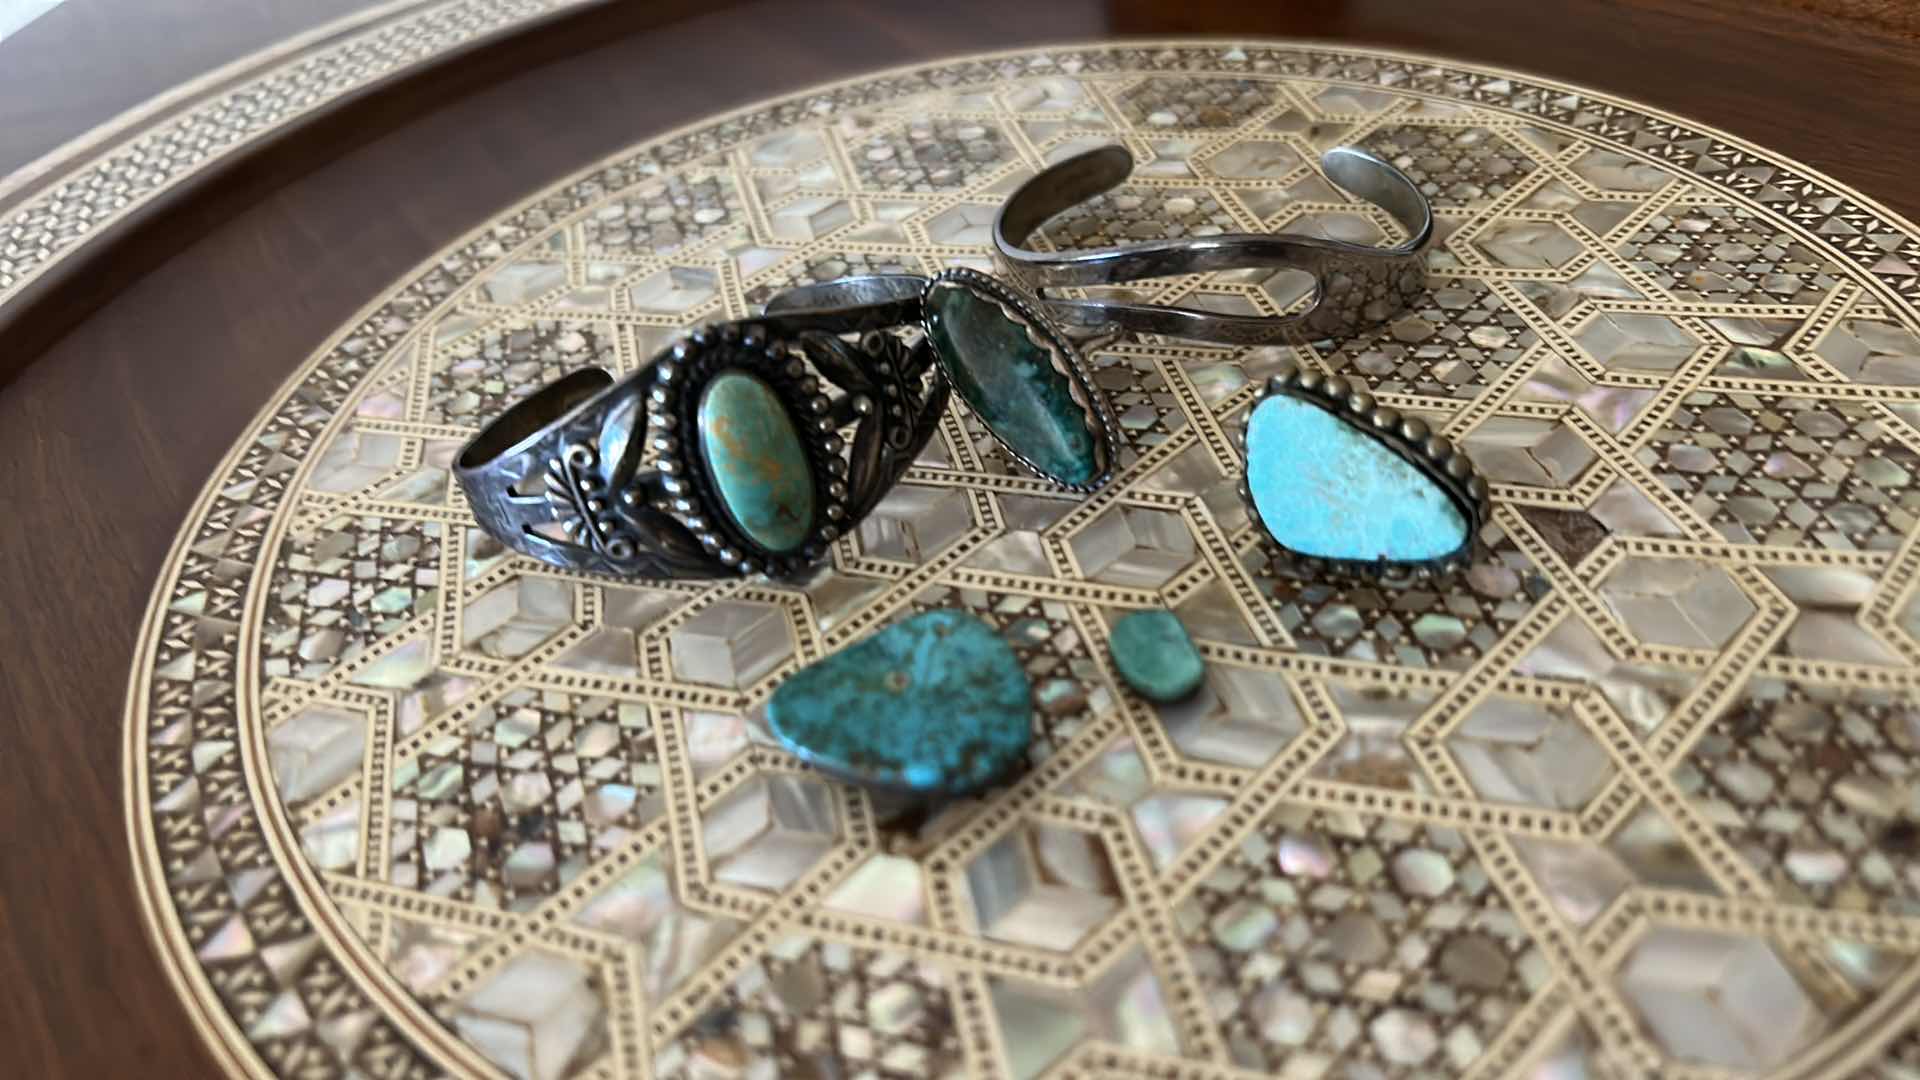 Photo 7 of Turquoise and silver jewelry collection